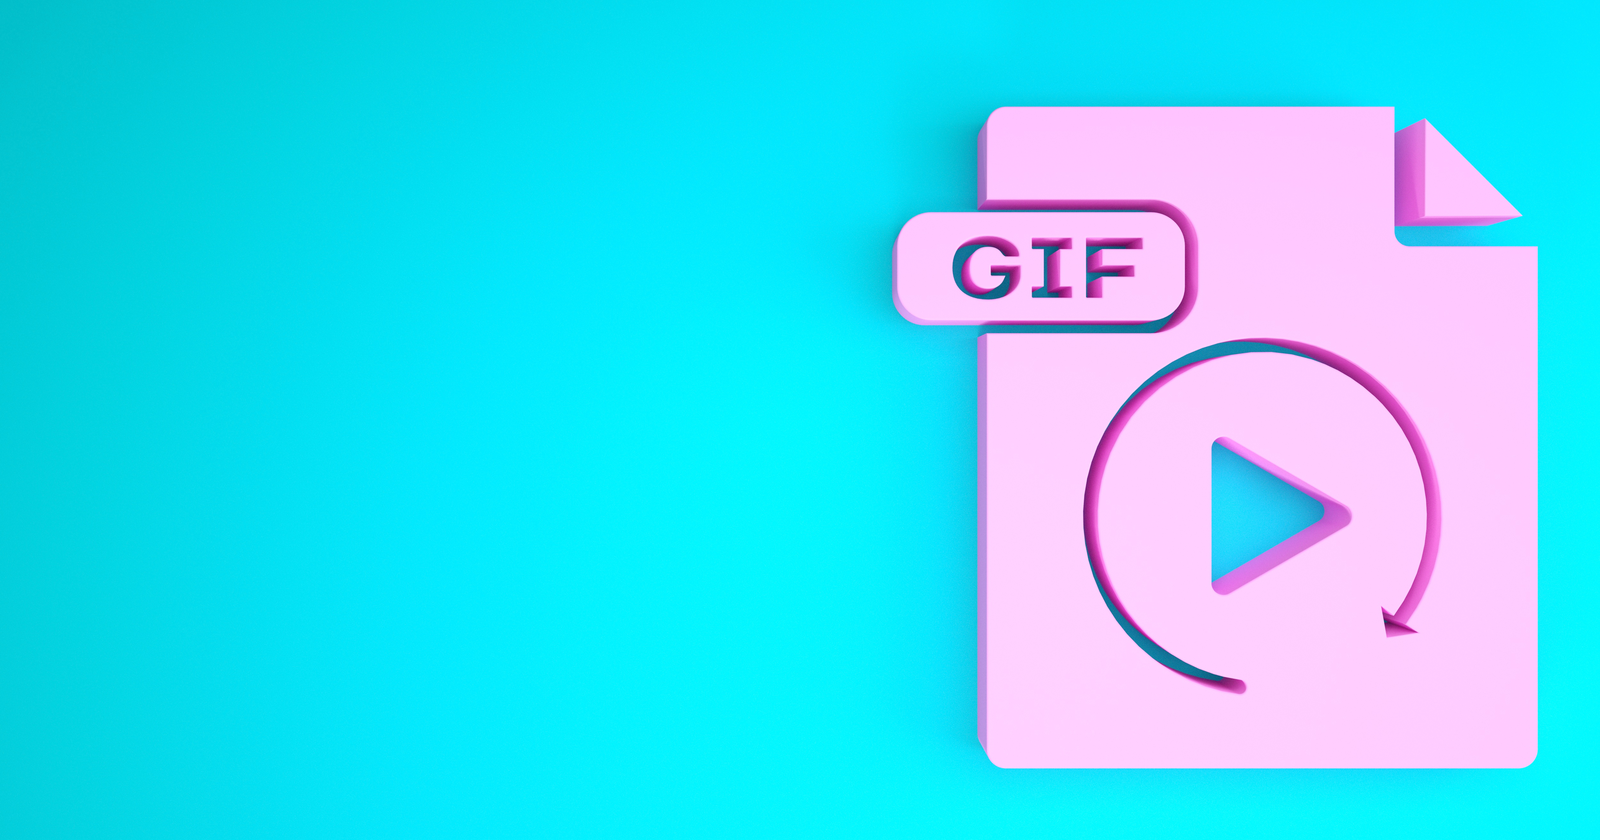 How to Optimize an Animated GIF, How to Reduce GIF Size